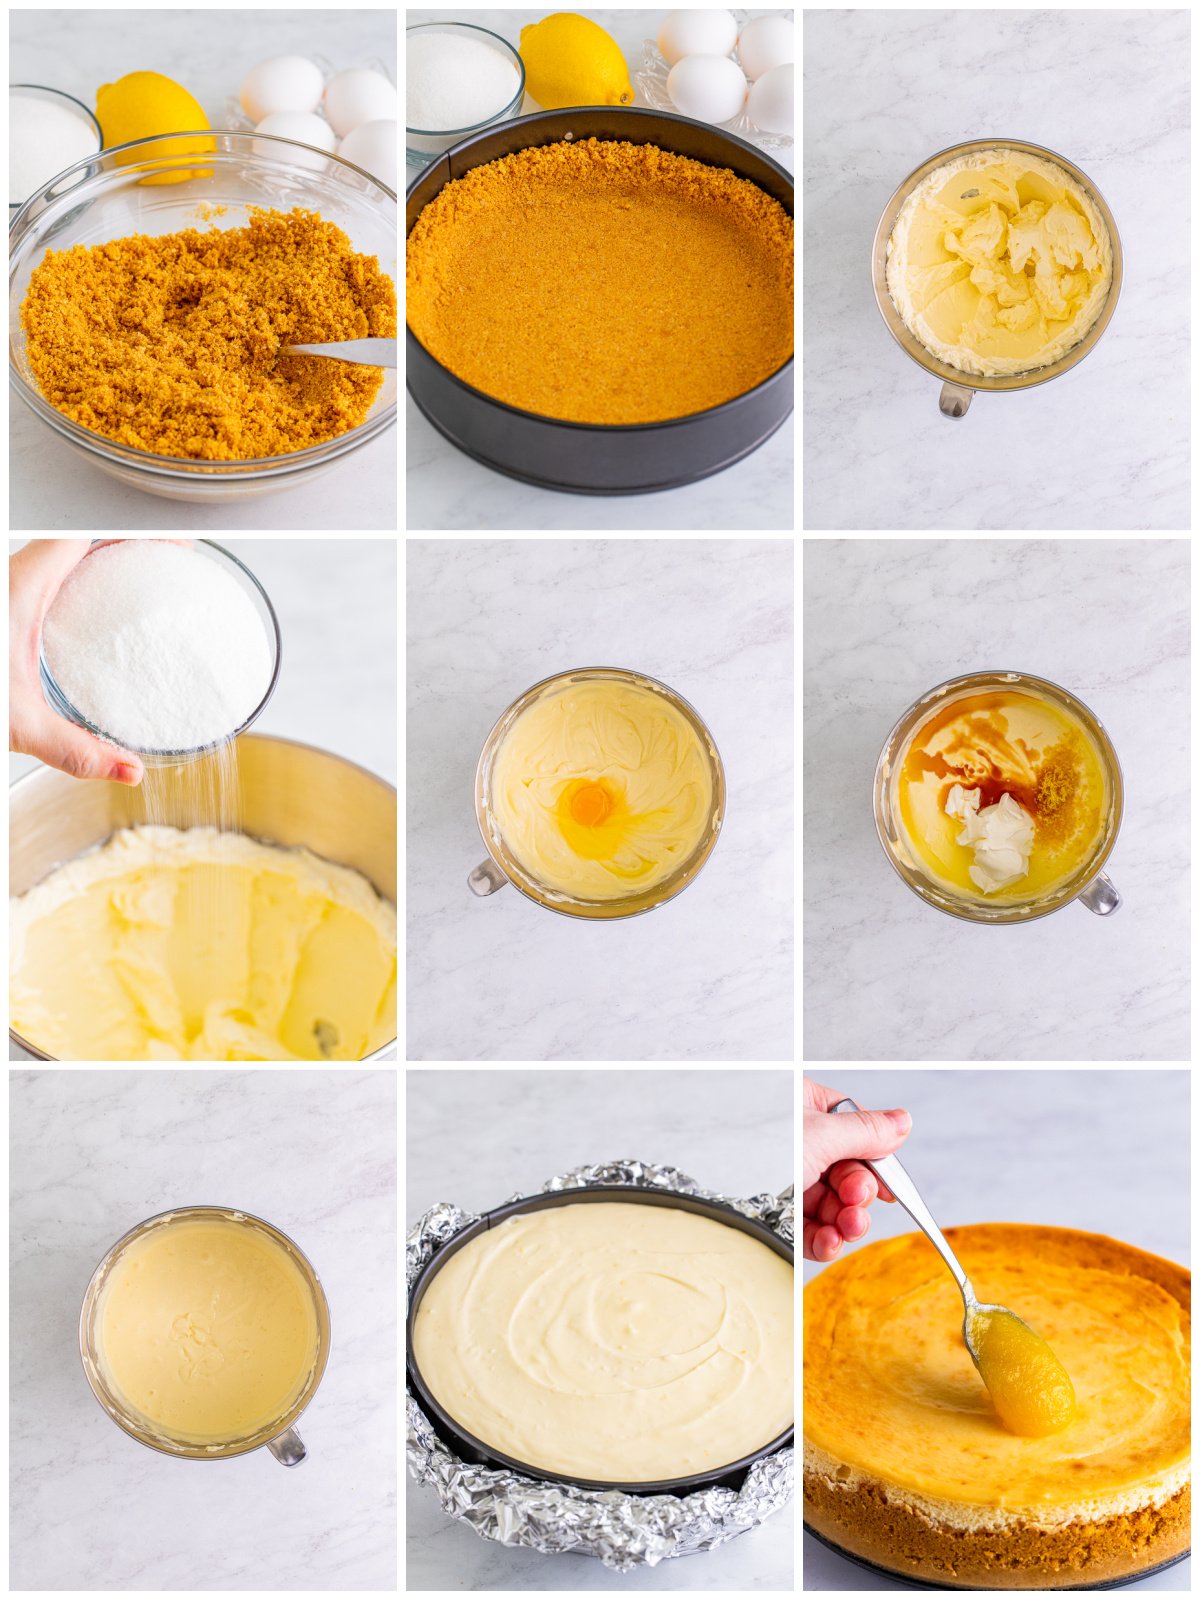 Step by step photos on how to make a Lemon Cheesecake.